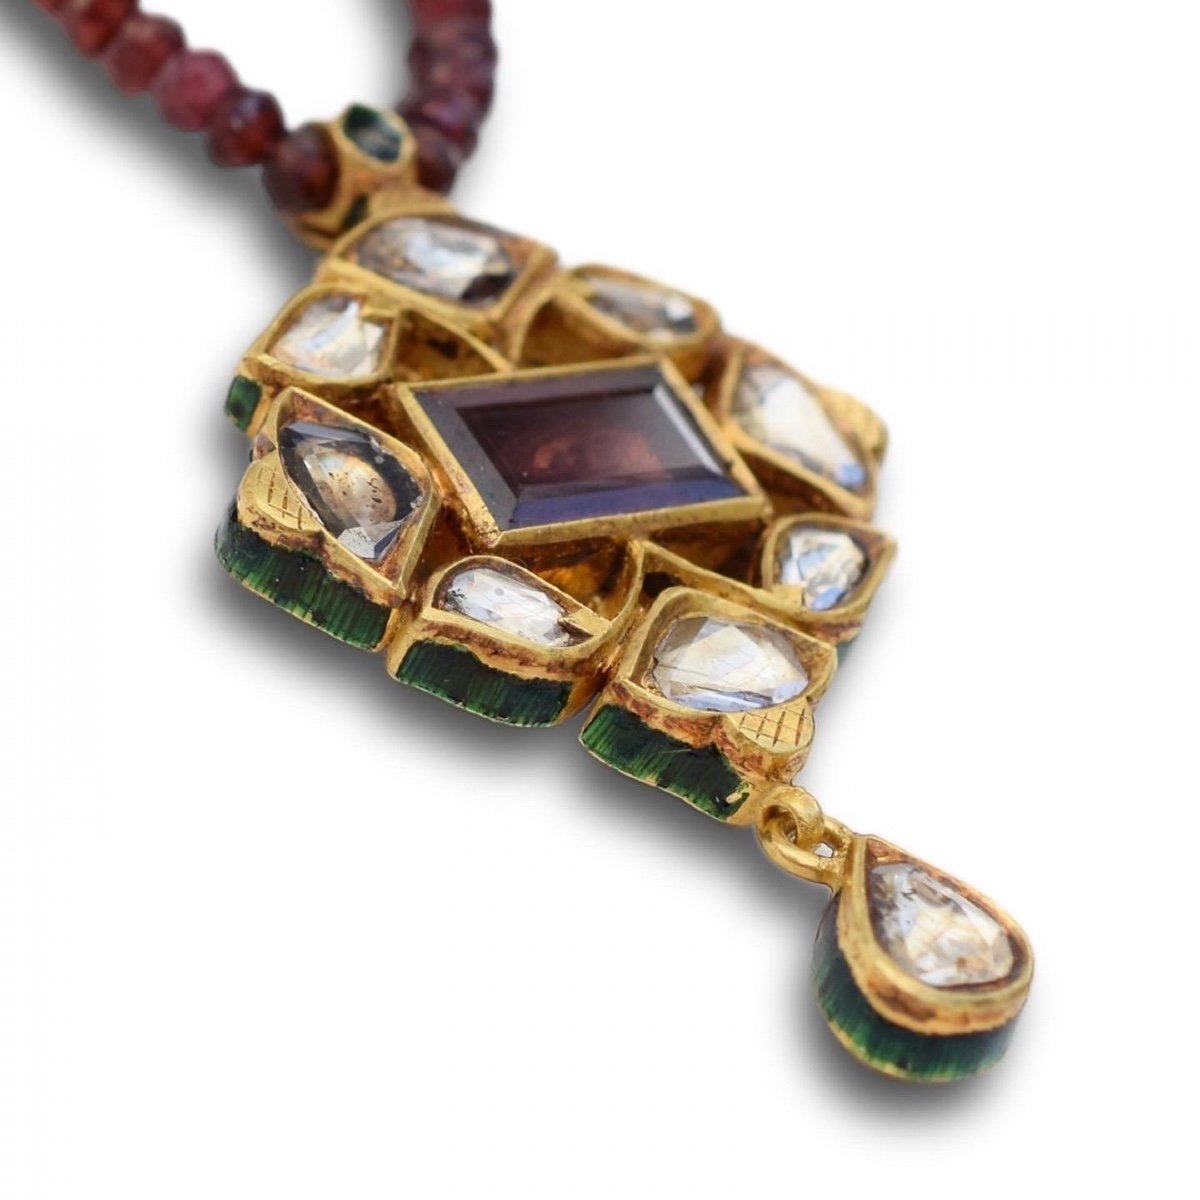 Enamel And Gold Pendant With Diamonds And A Table Cut Garnet. Indian, Circa 1900-photo-5